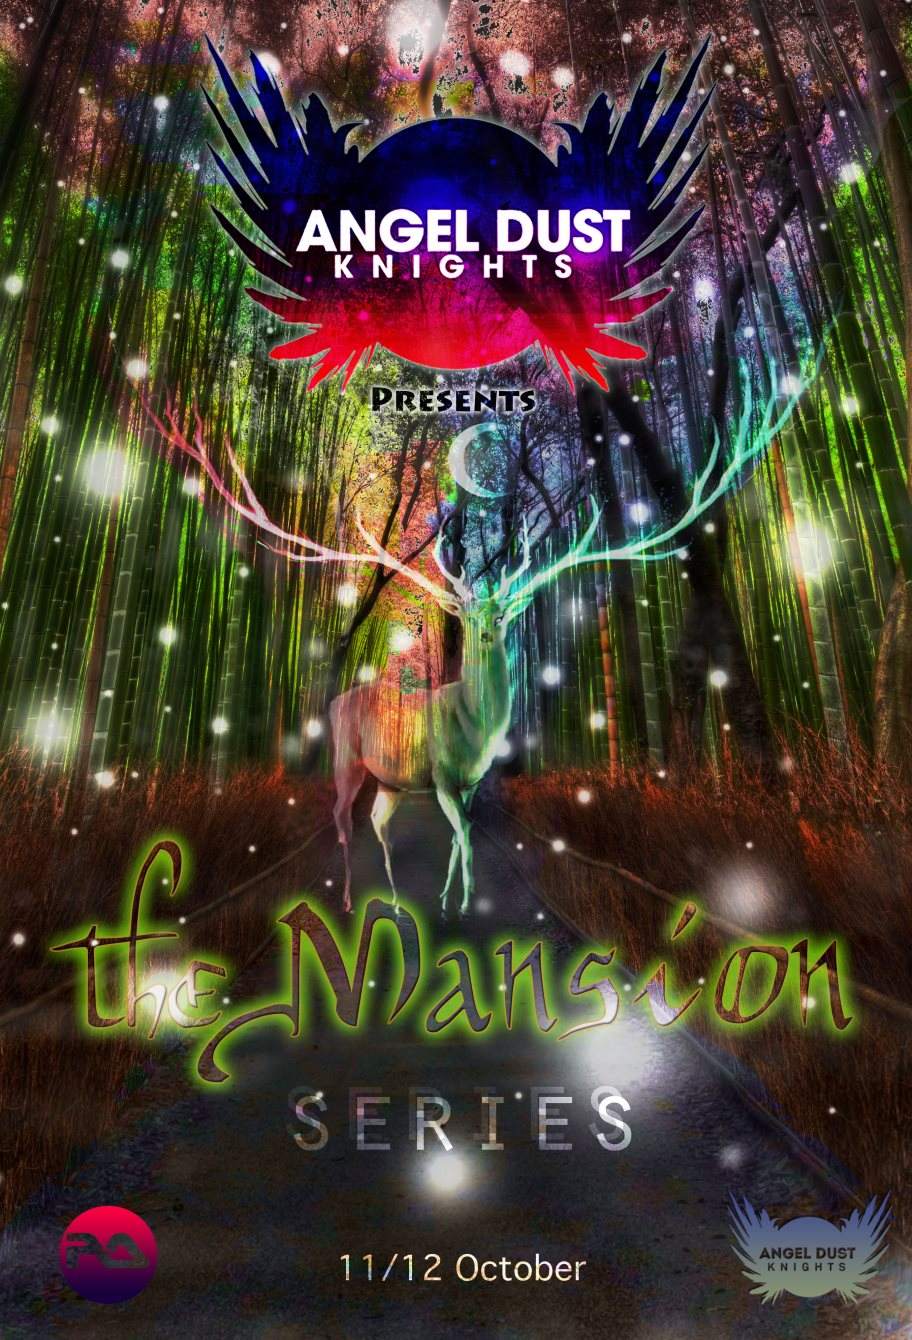 Angel Dust presents The Mansion Series - Página frontal